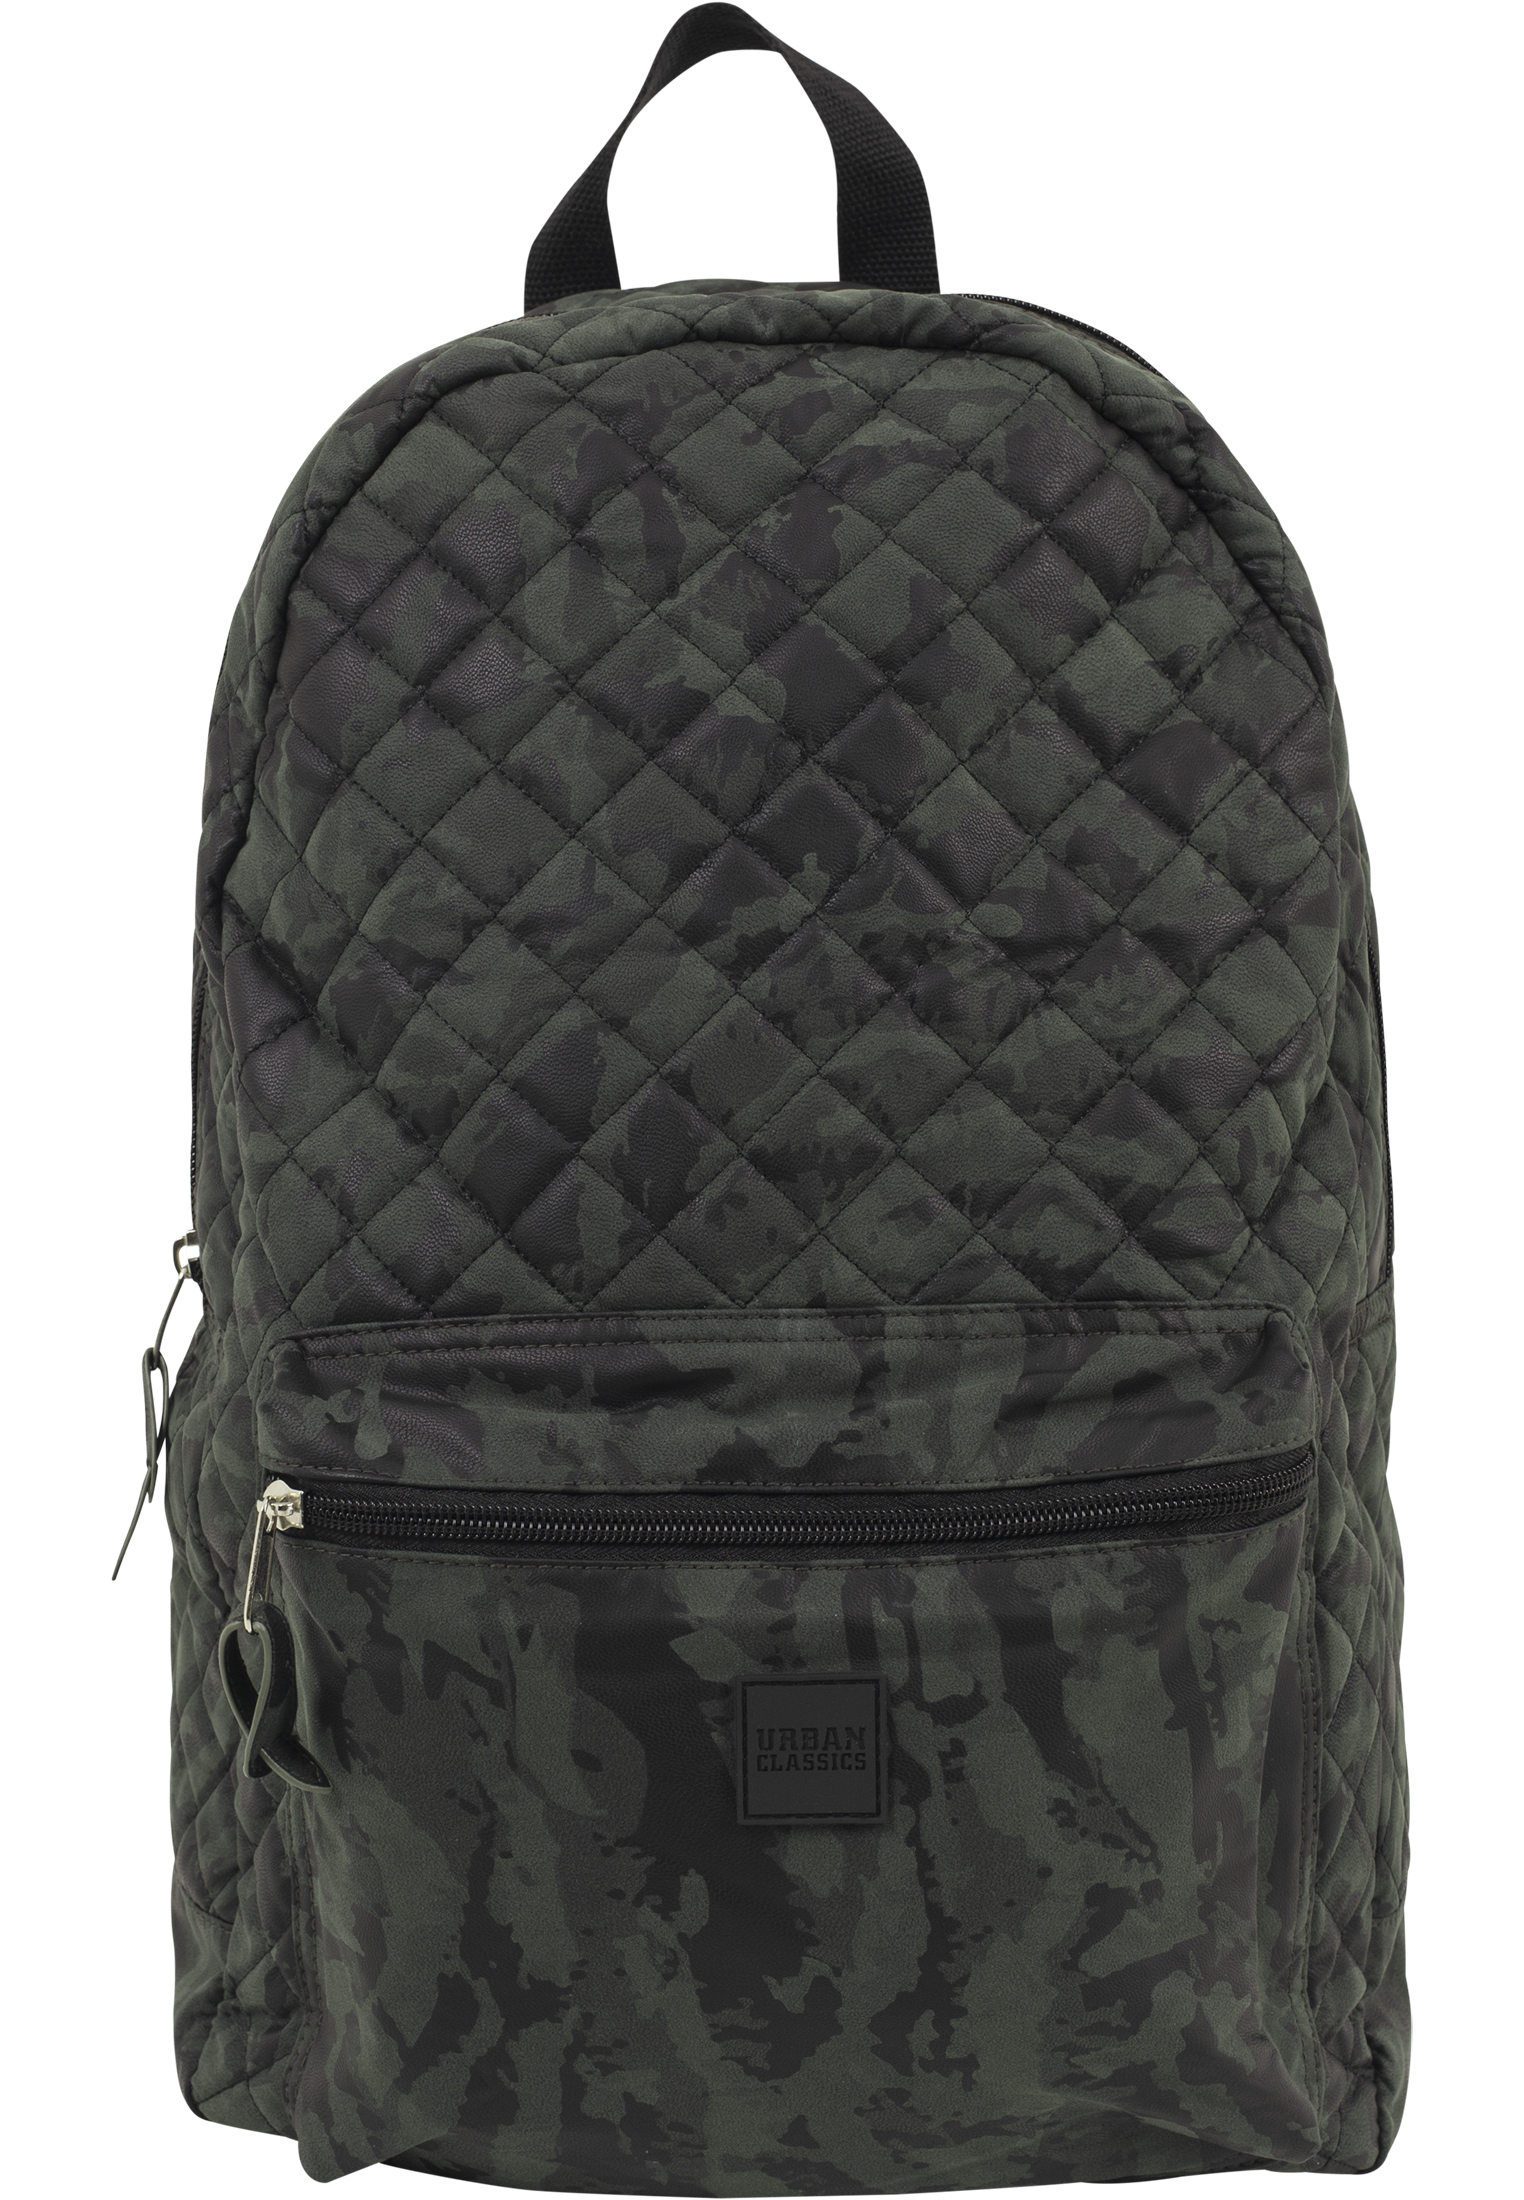 Accessories Diamond Quilt Leather Imitation Backpack in Farbe camo